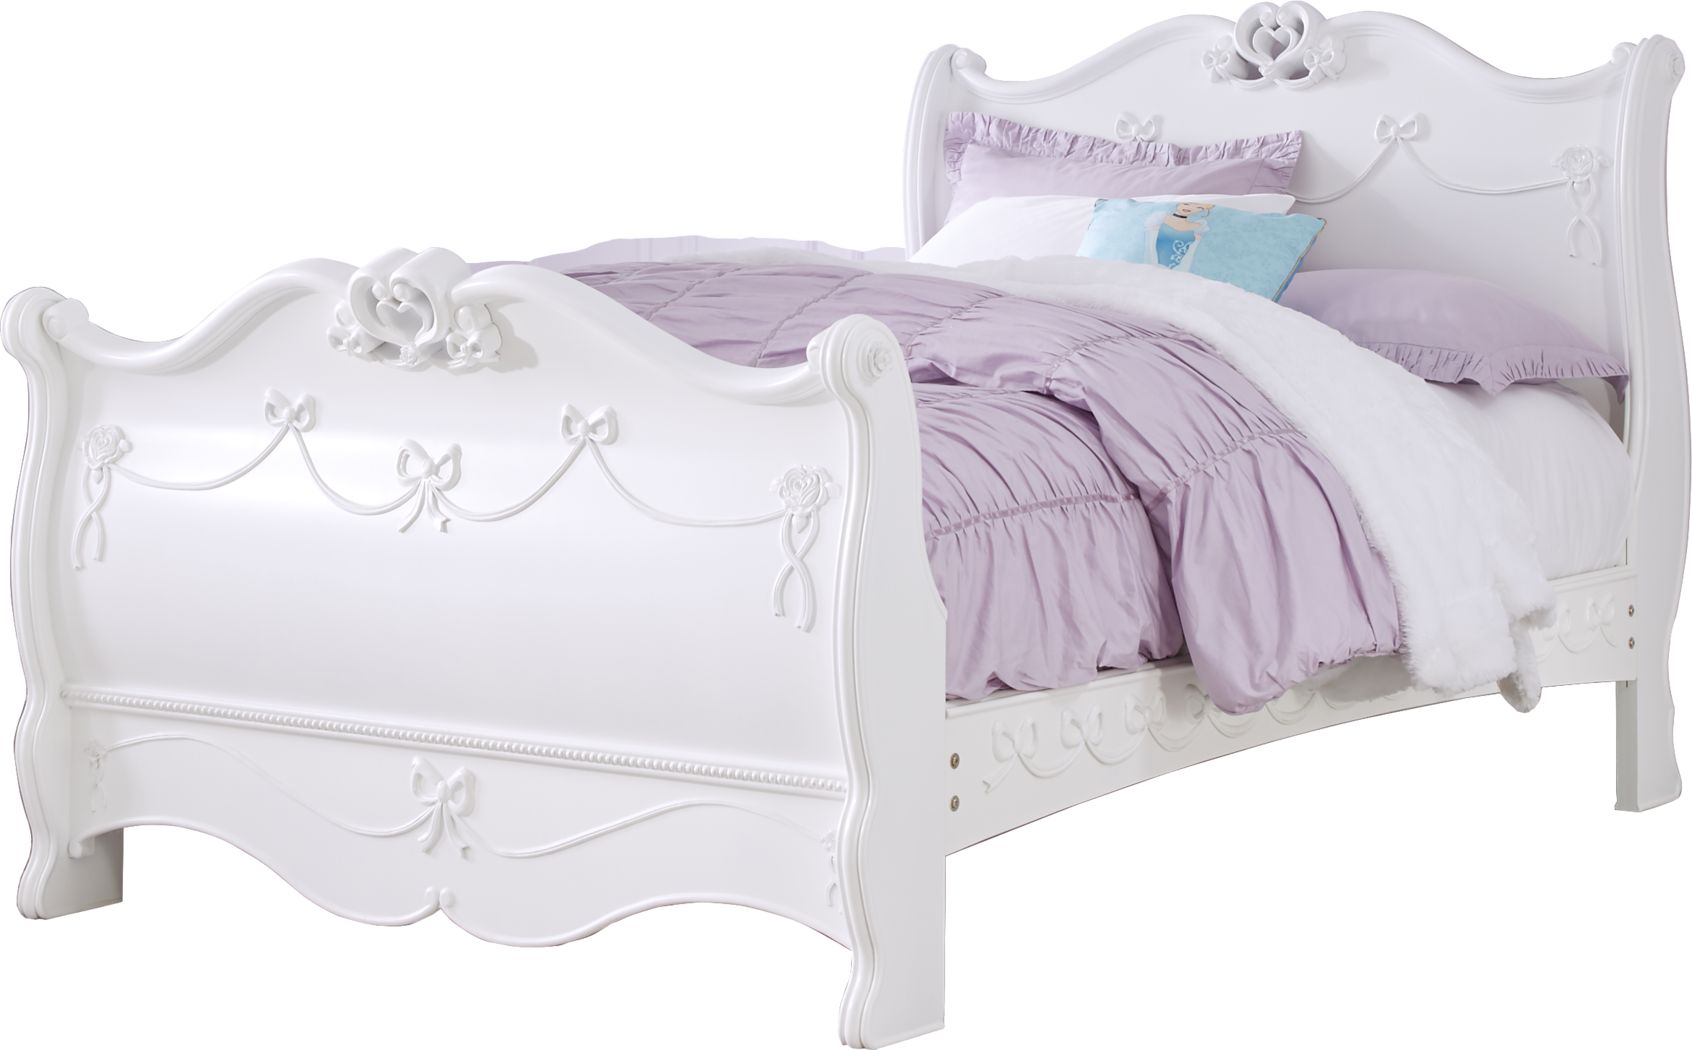 Pc Twin Sleigh Bed, White Twin Sleigh Bed With Trundle